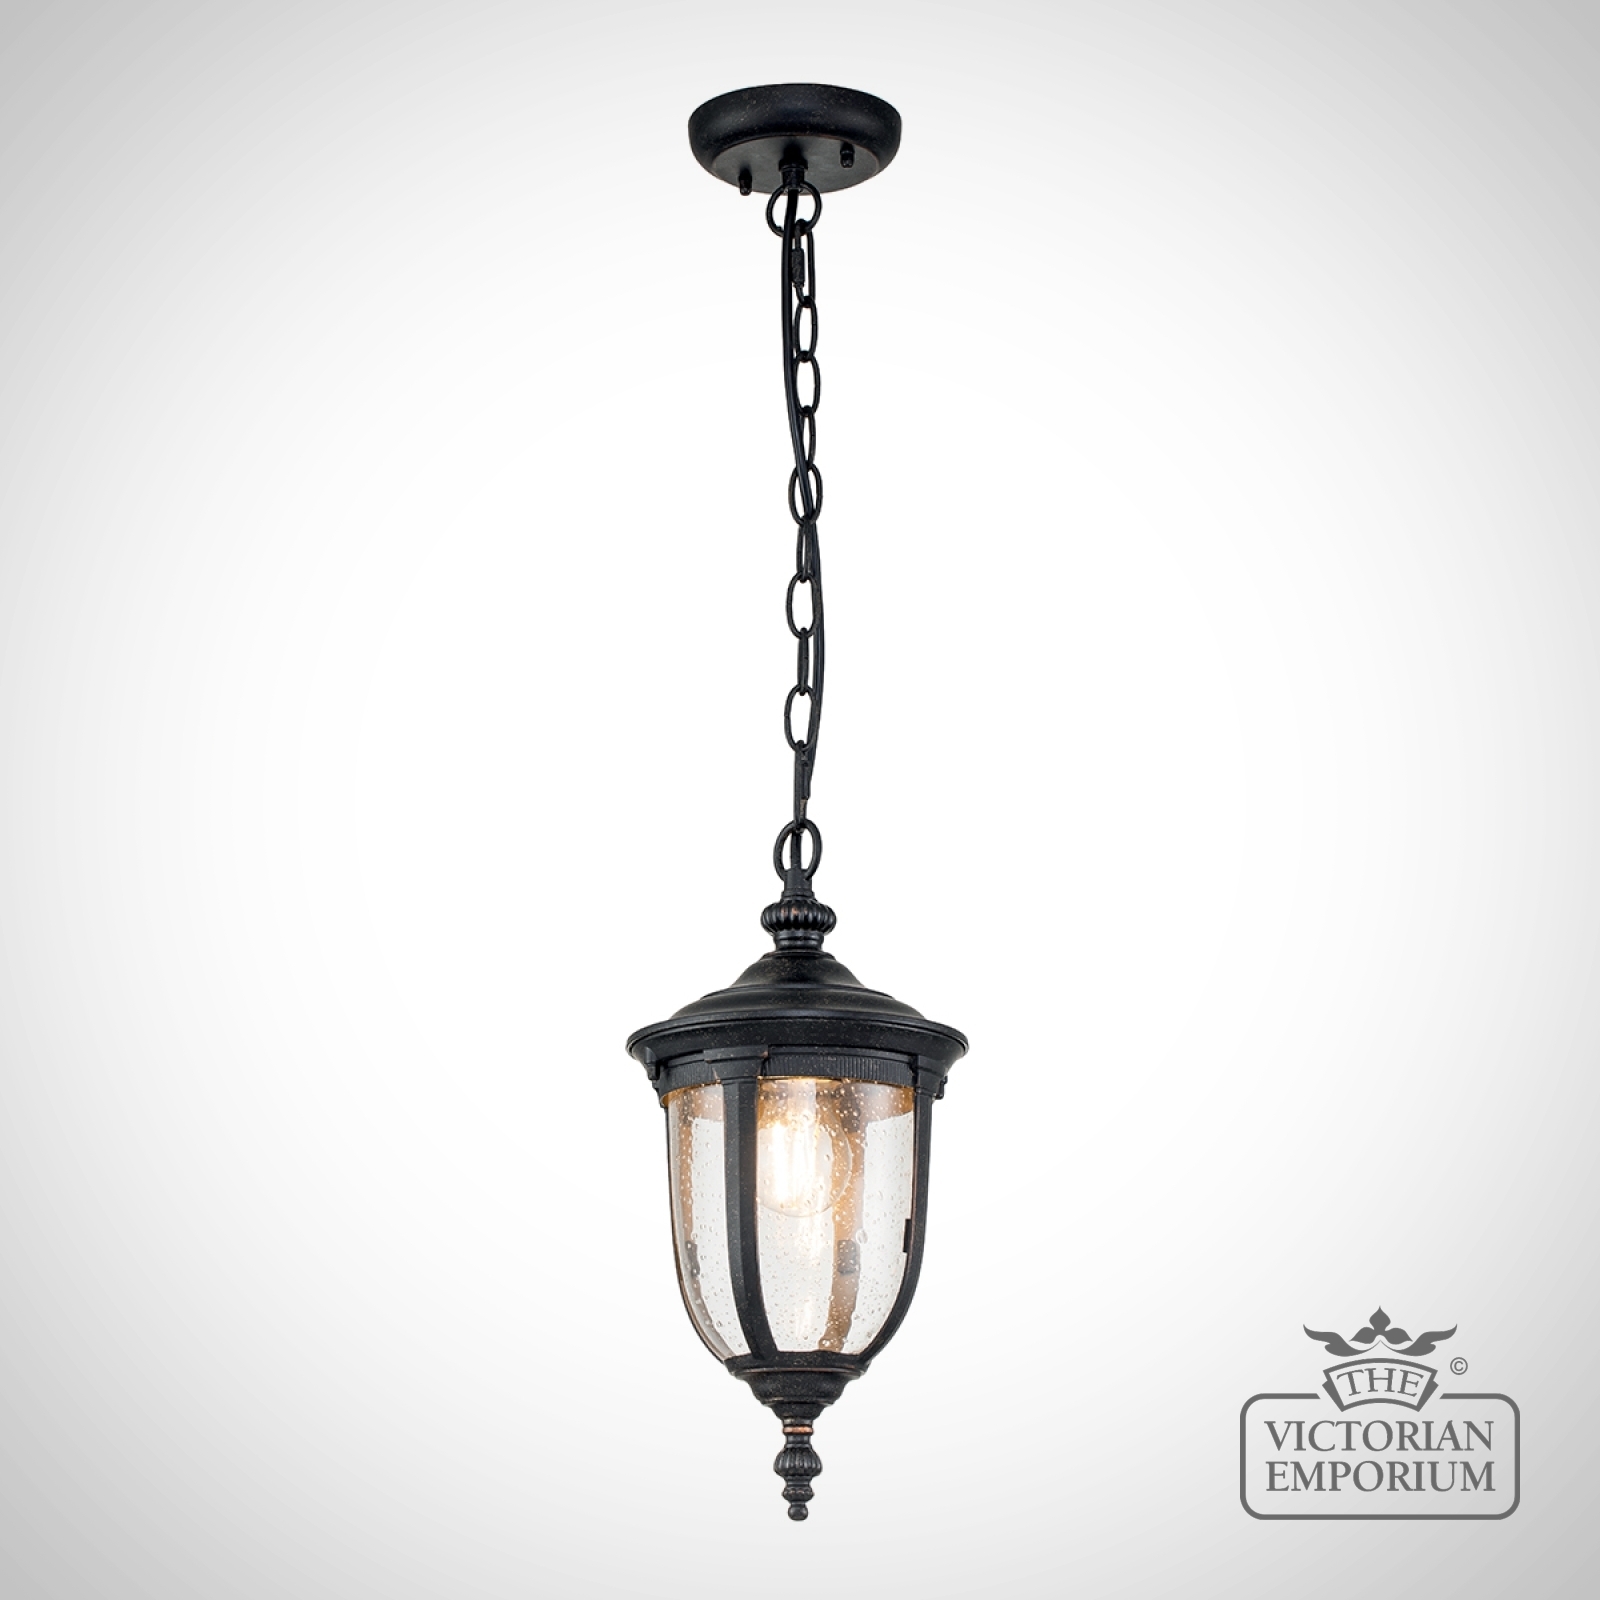 Cleveland Chain Lantern In A Weathered Bronze Finish